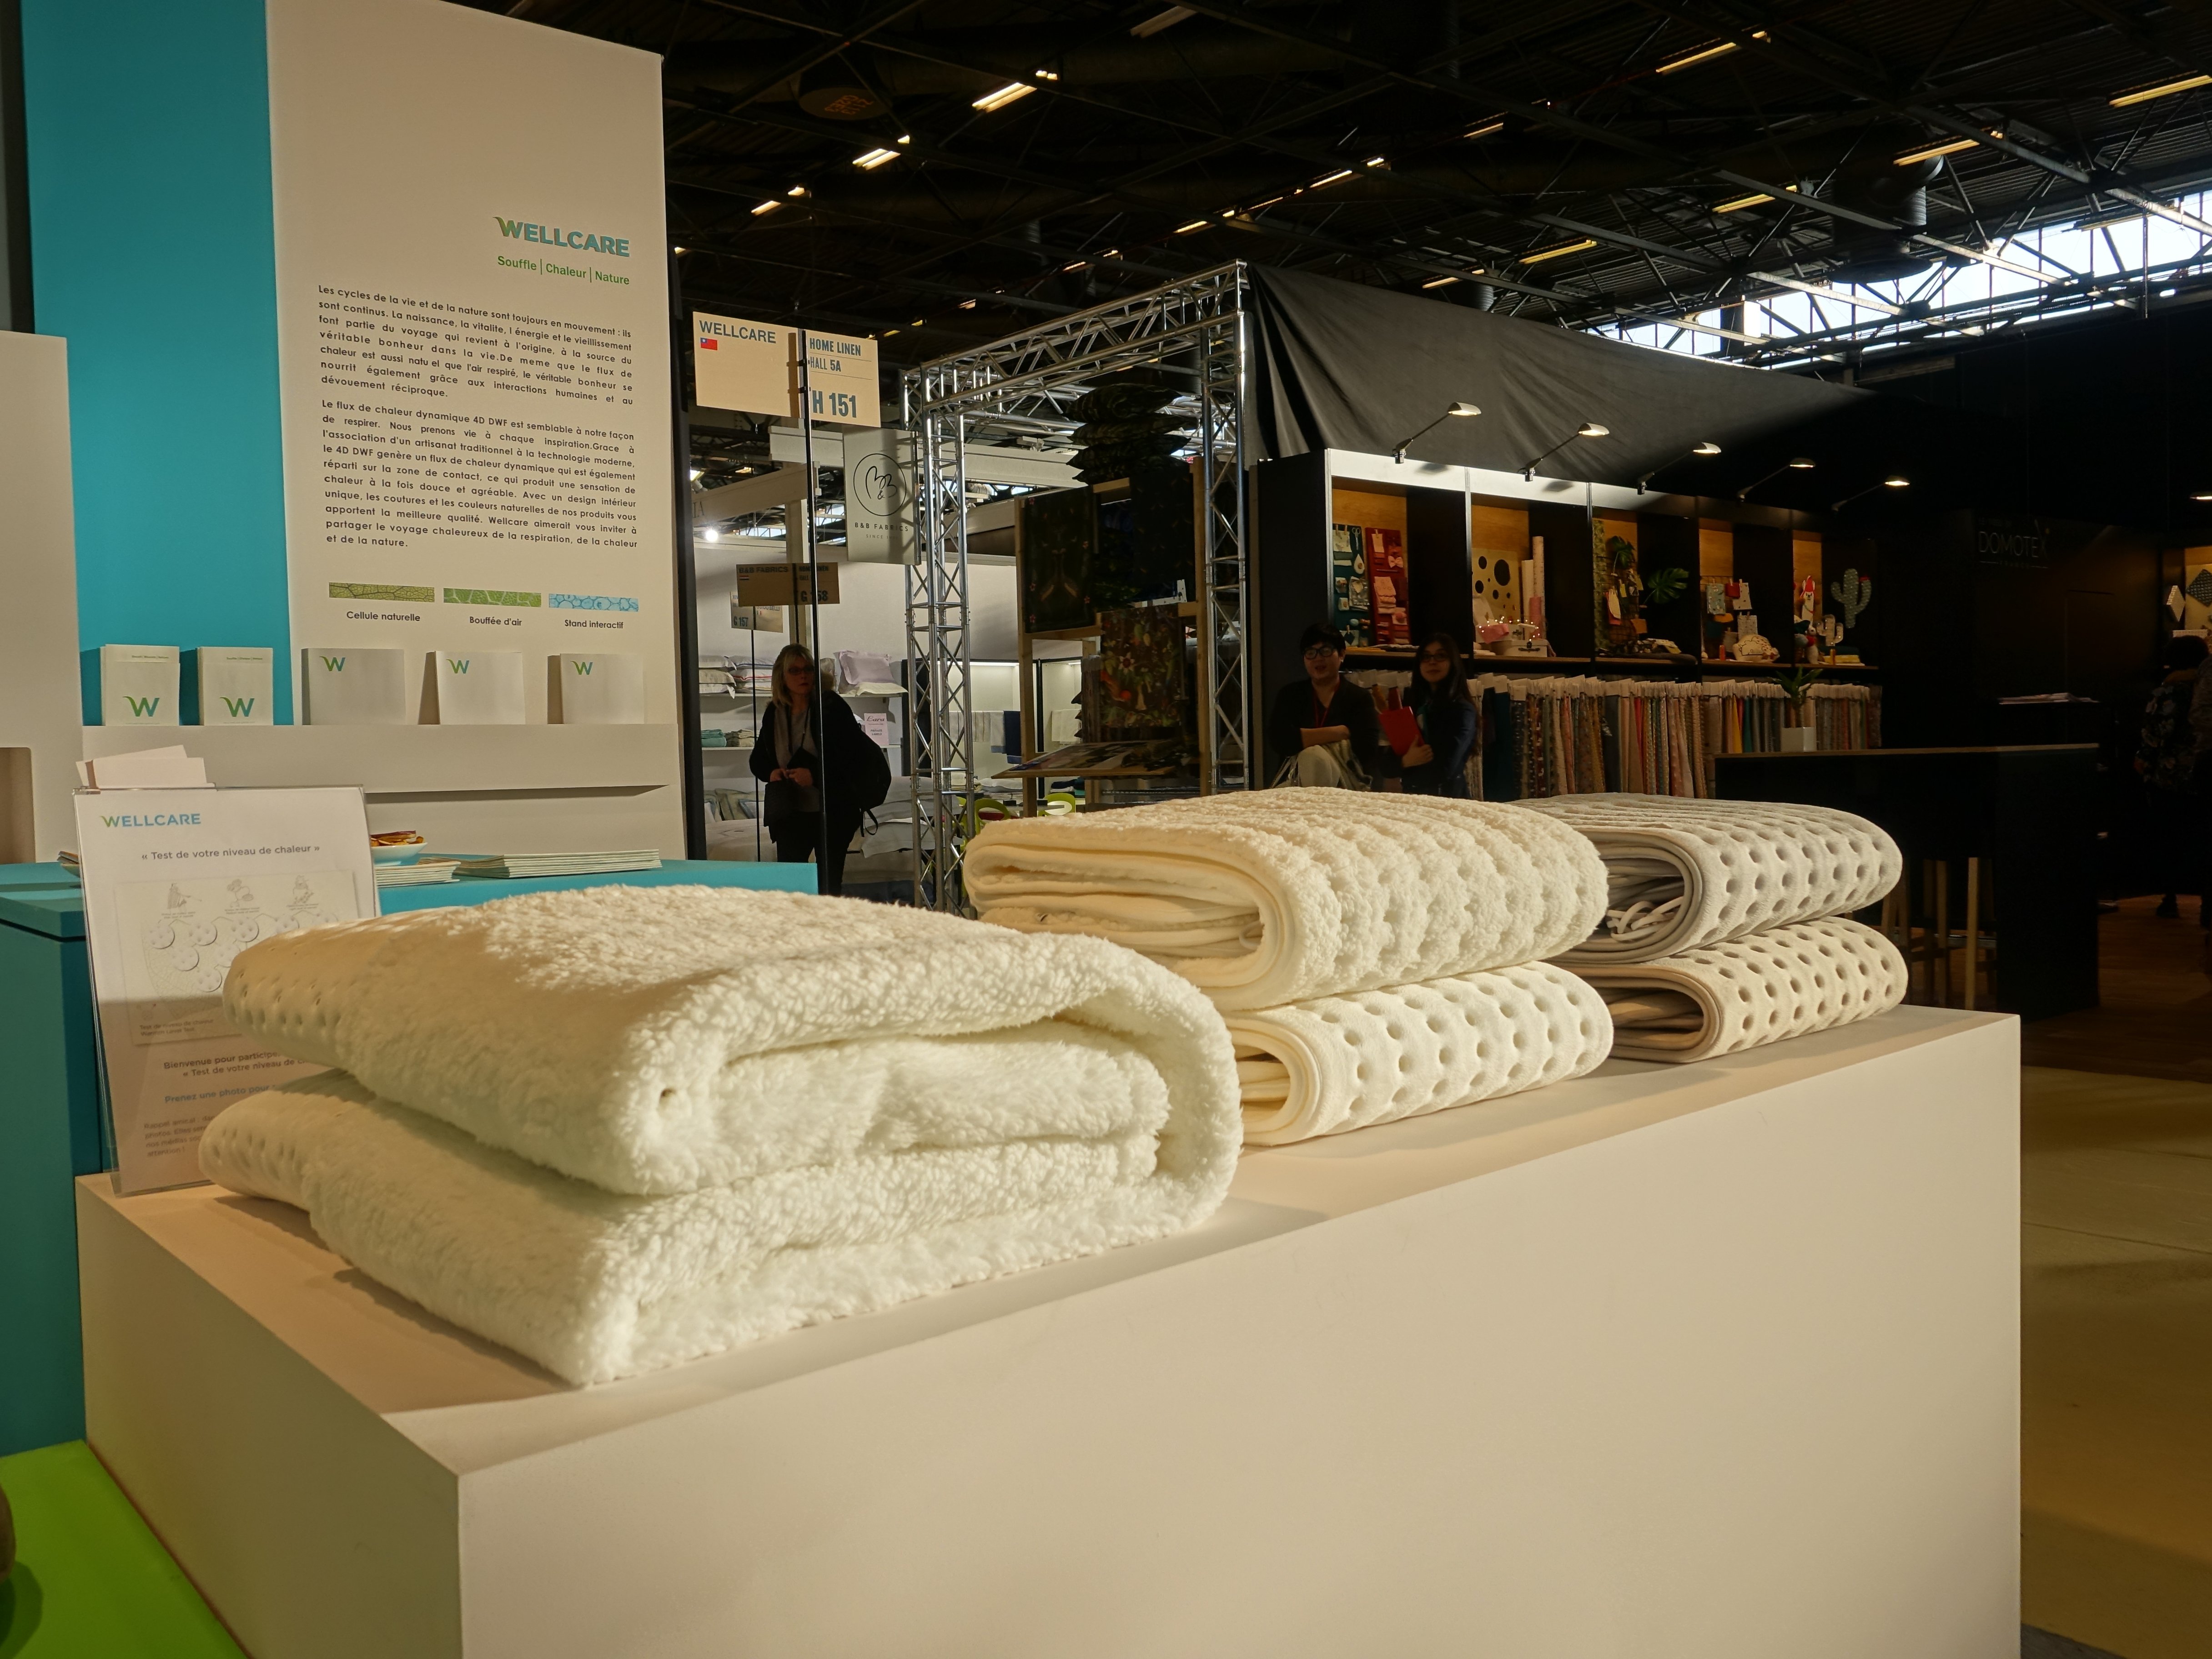 Wellcare's electric blanket materials